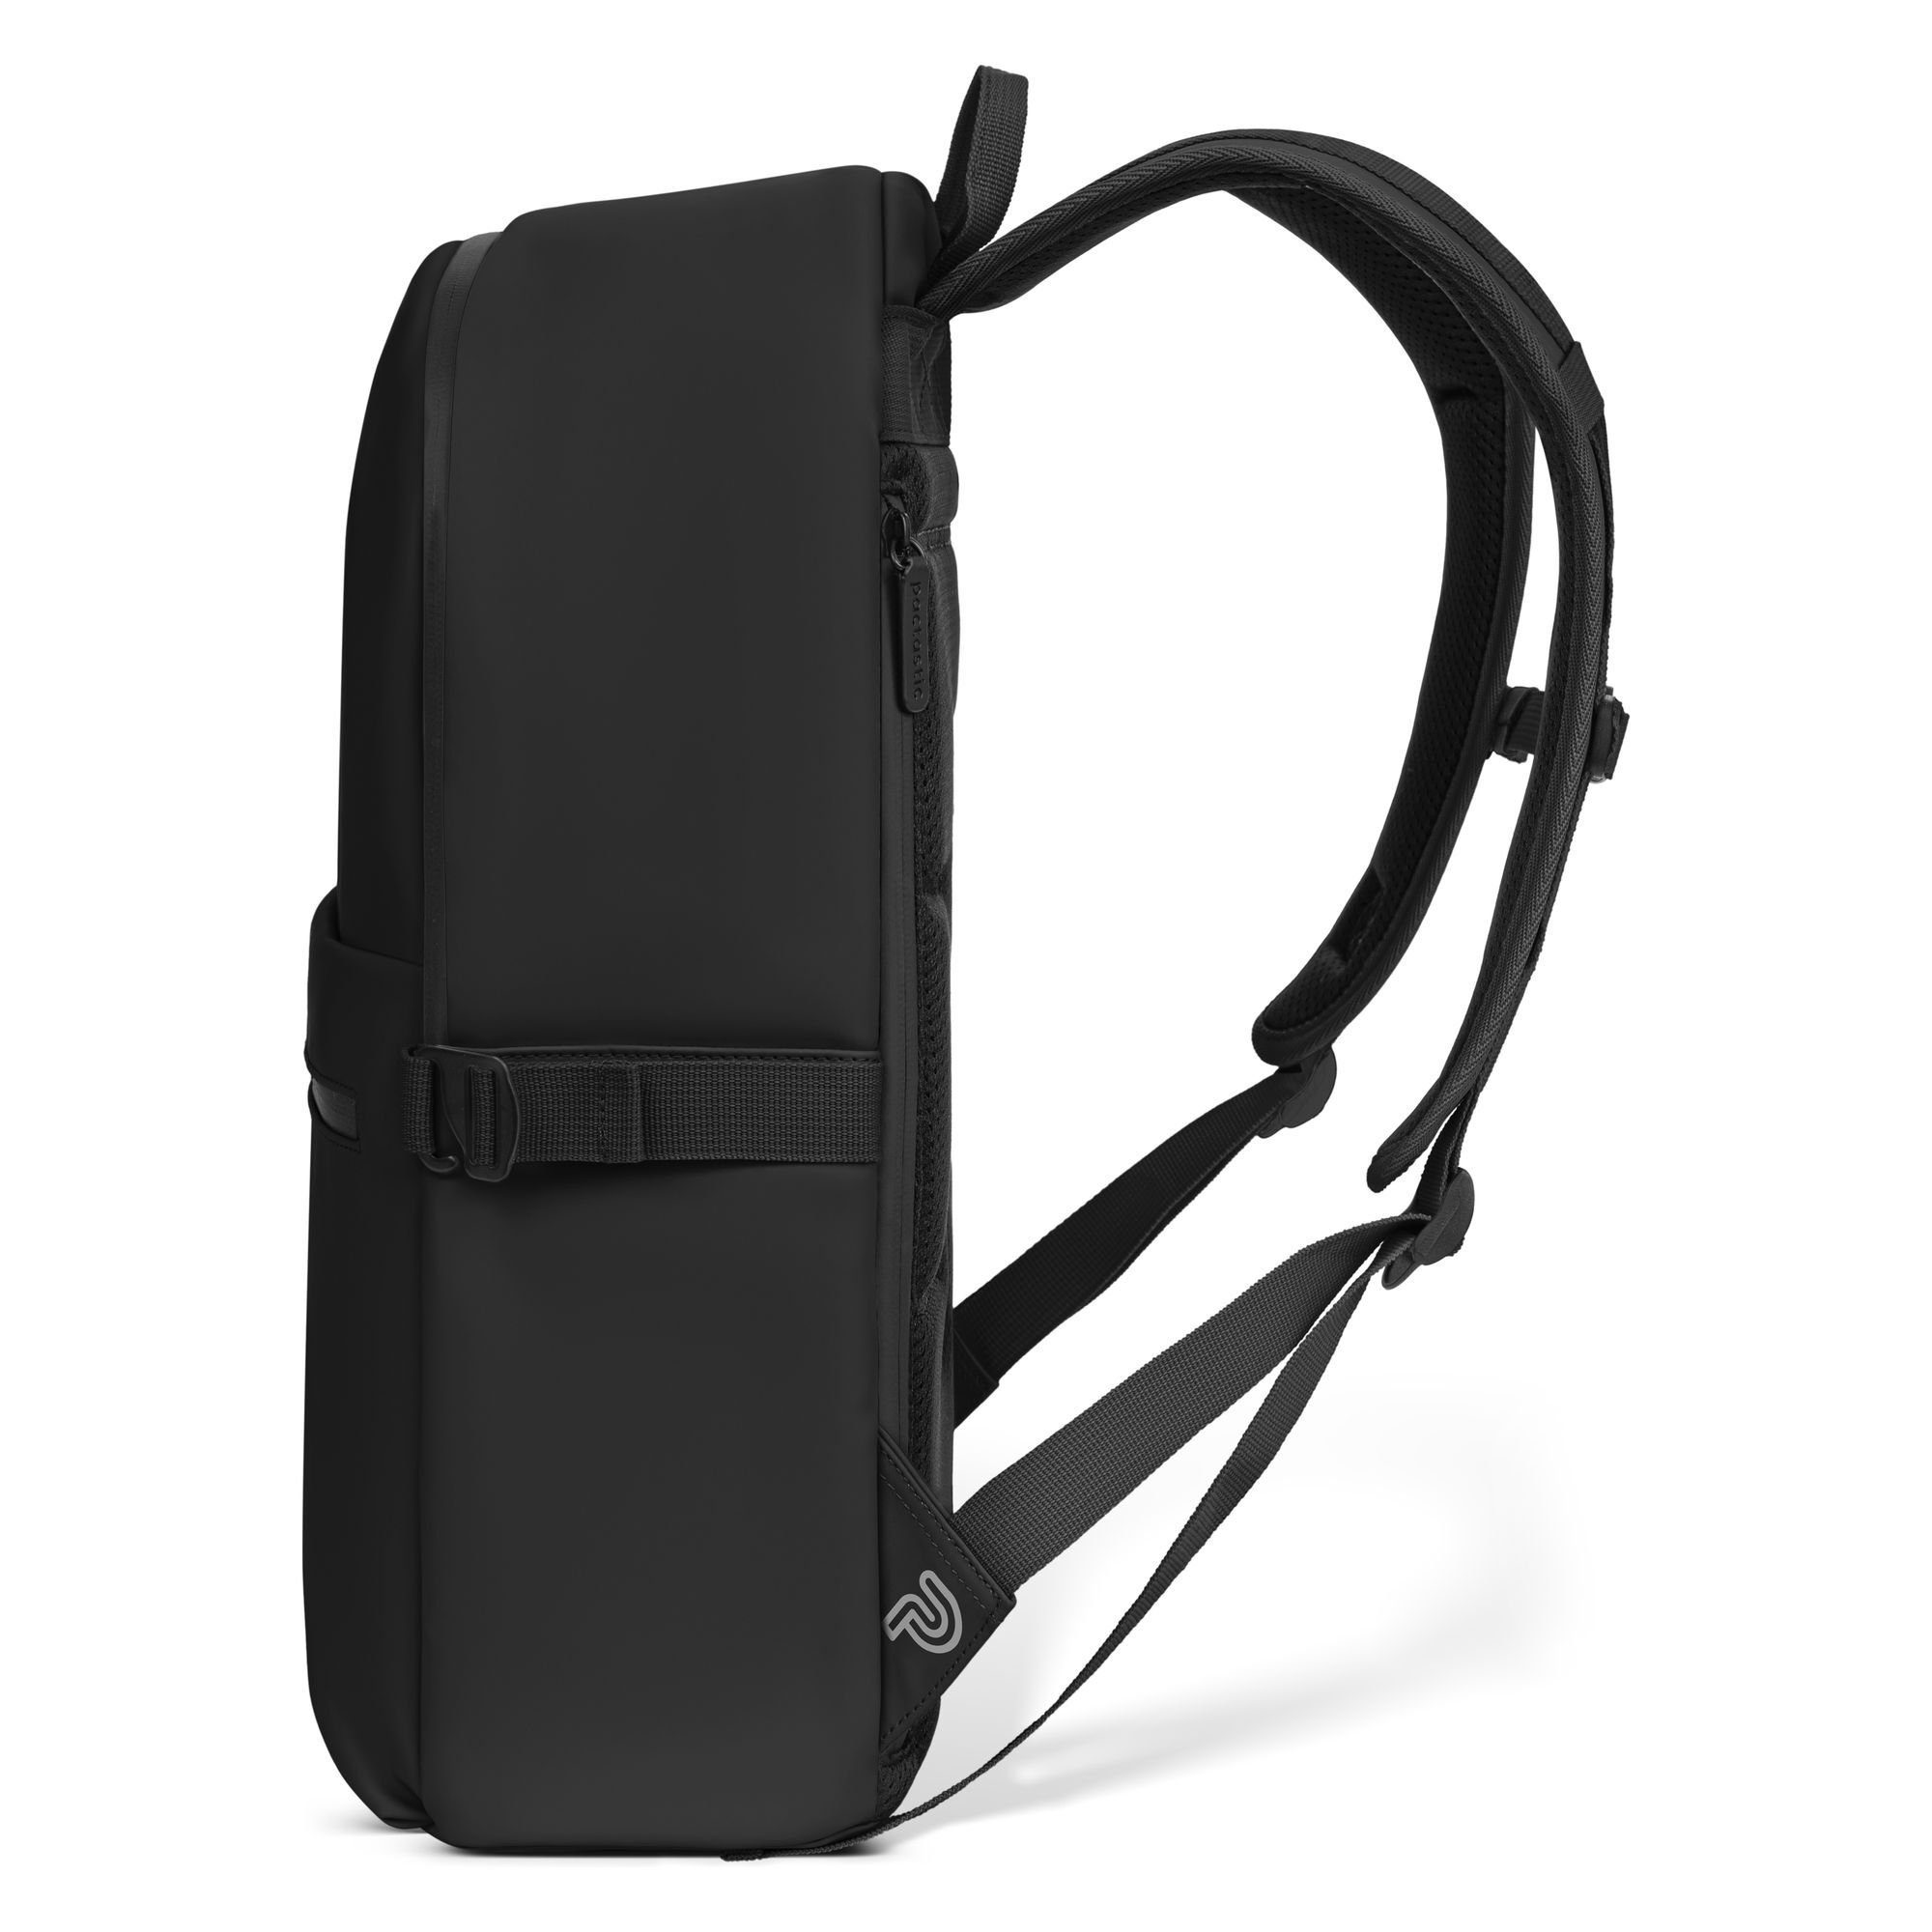 Pactastic Daypack Veganes Tech-Material black Urban Collection